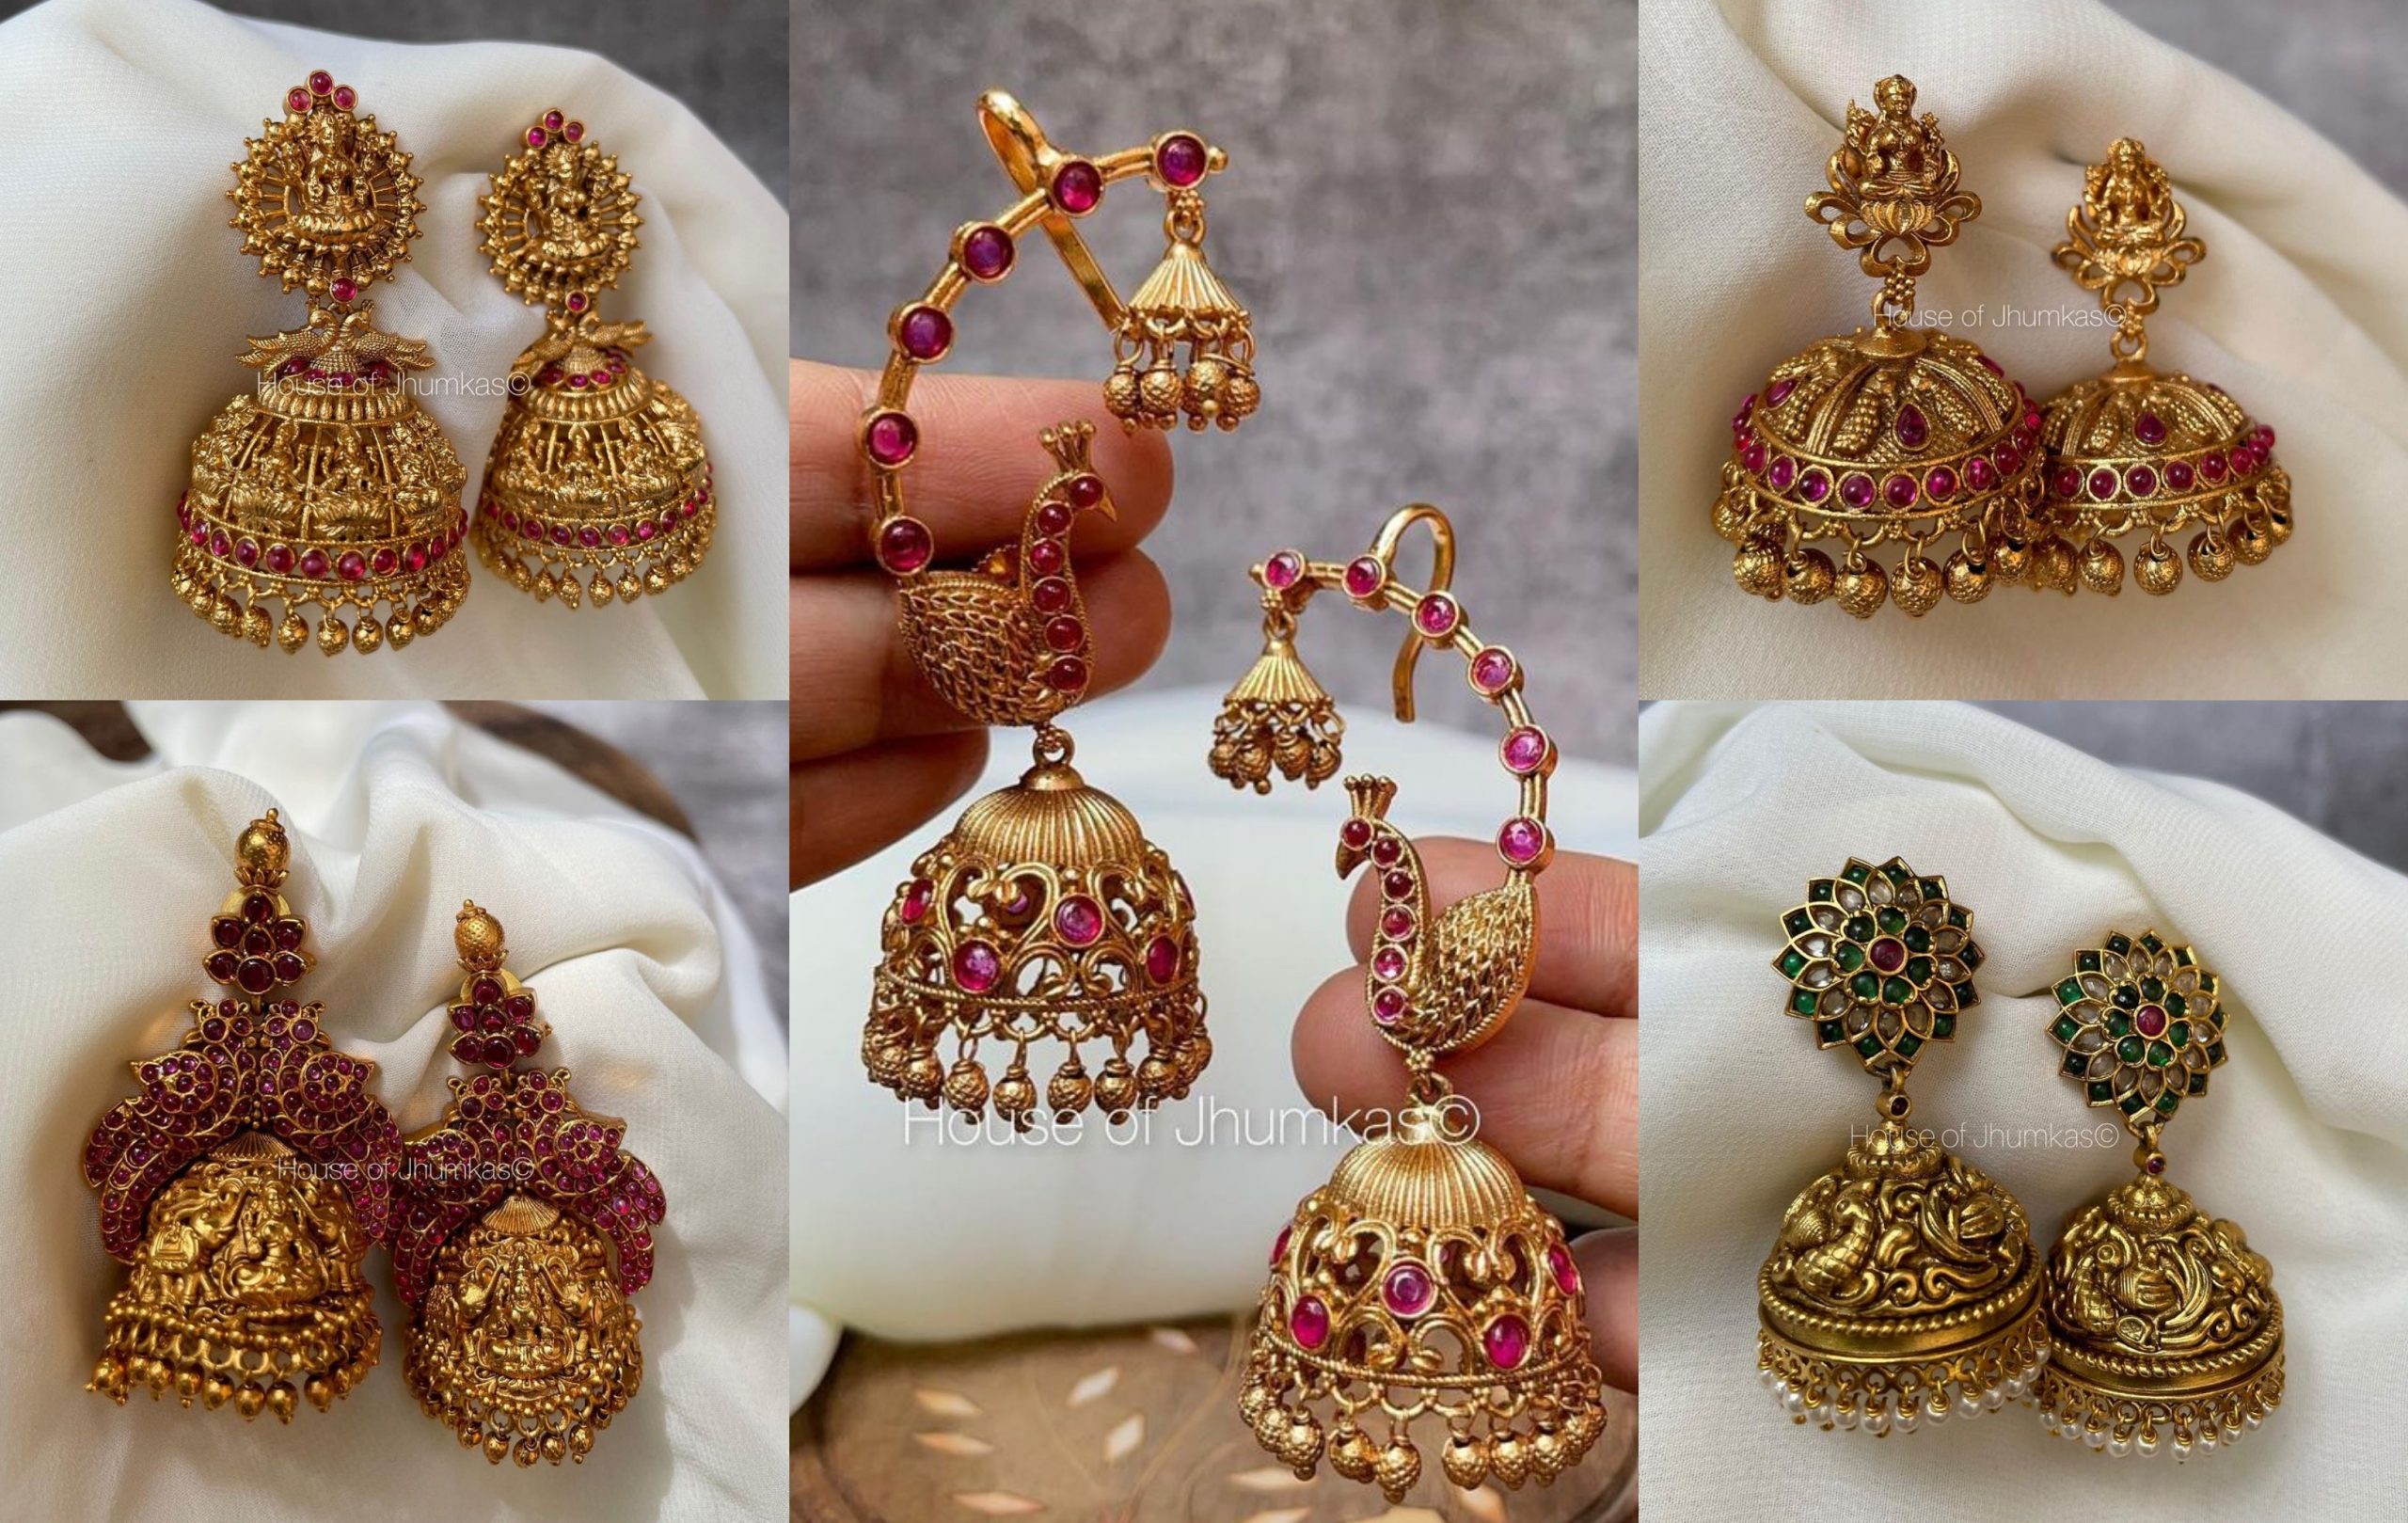 Stunning Earrings And Jhumka Designs From The House Of Jhumkas!